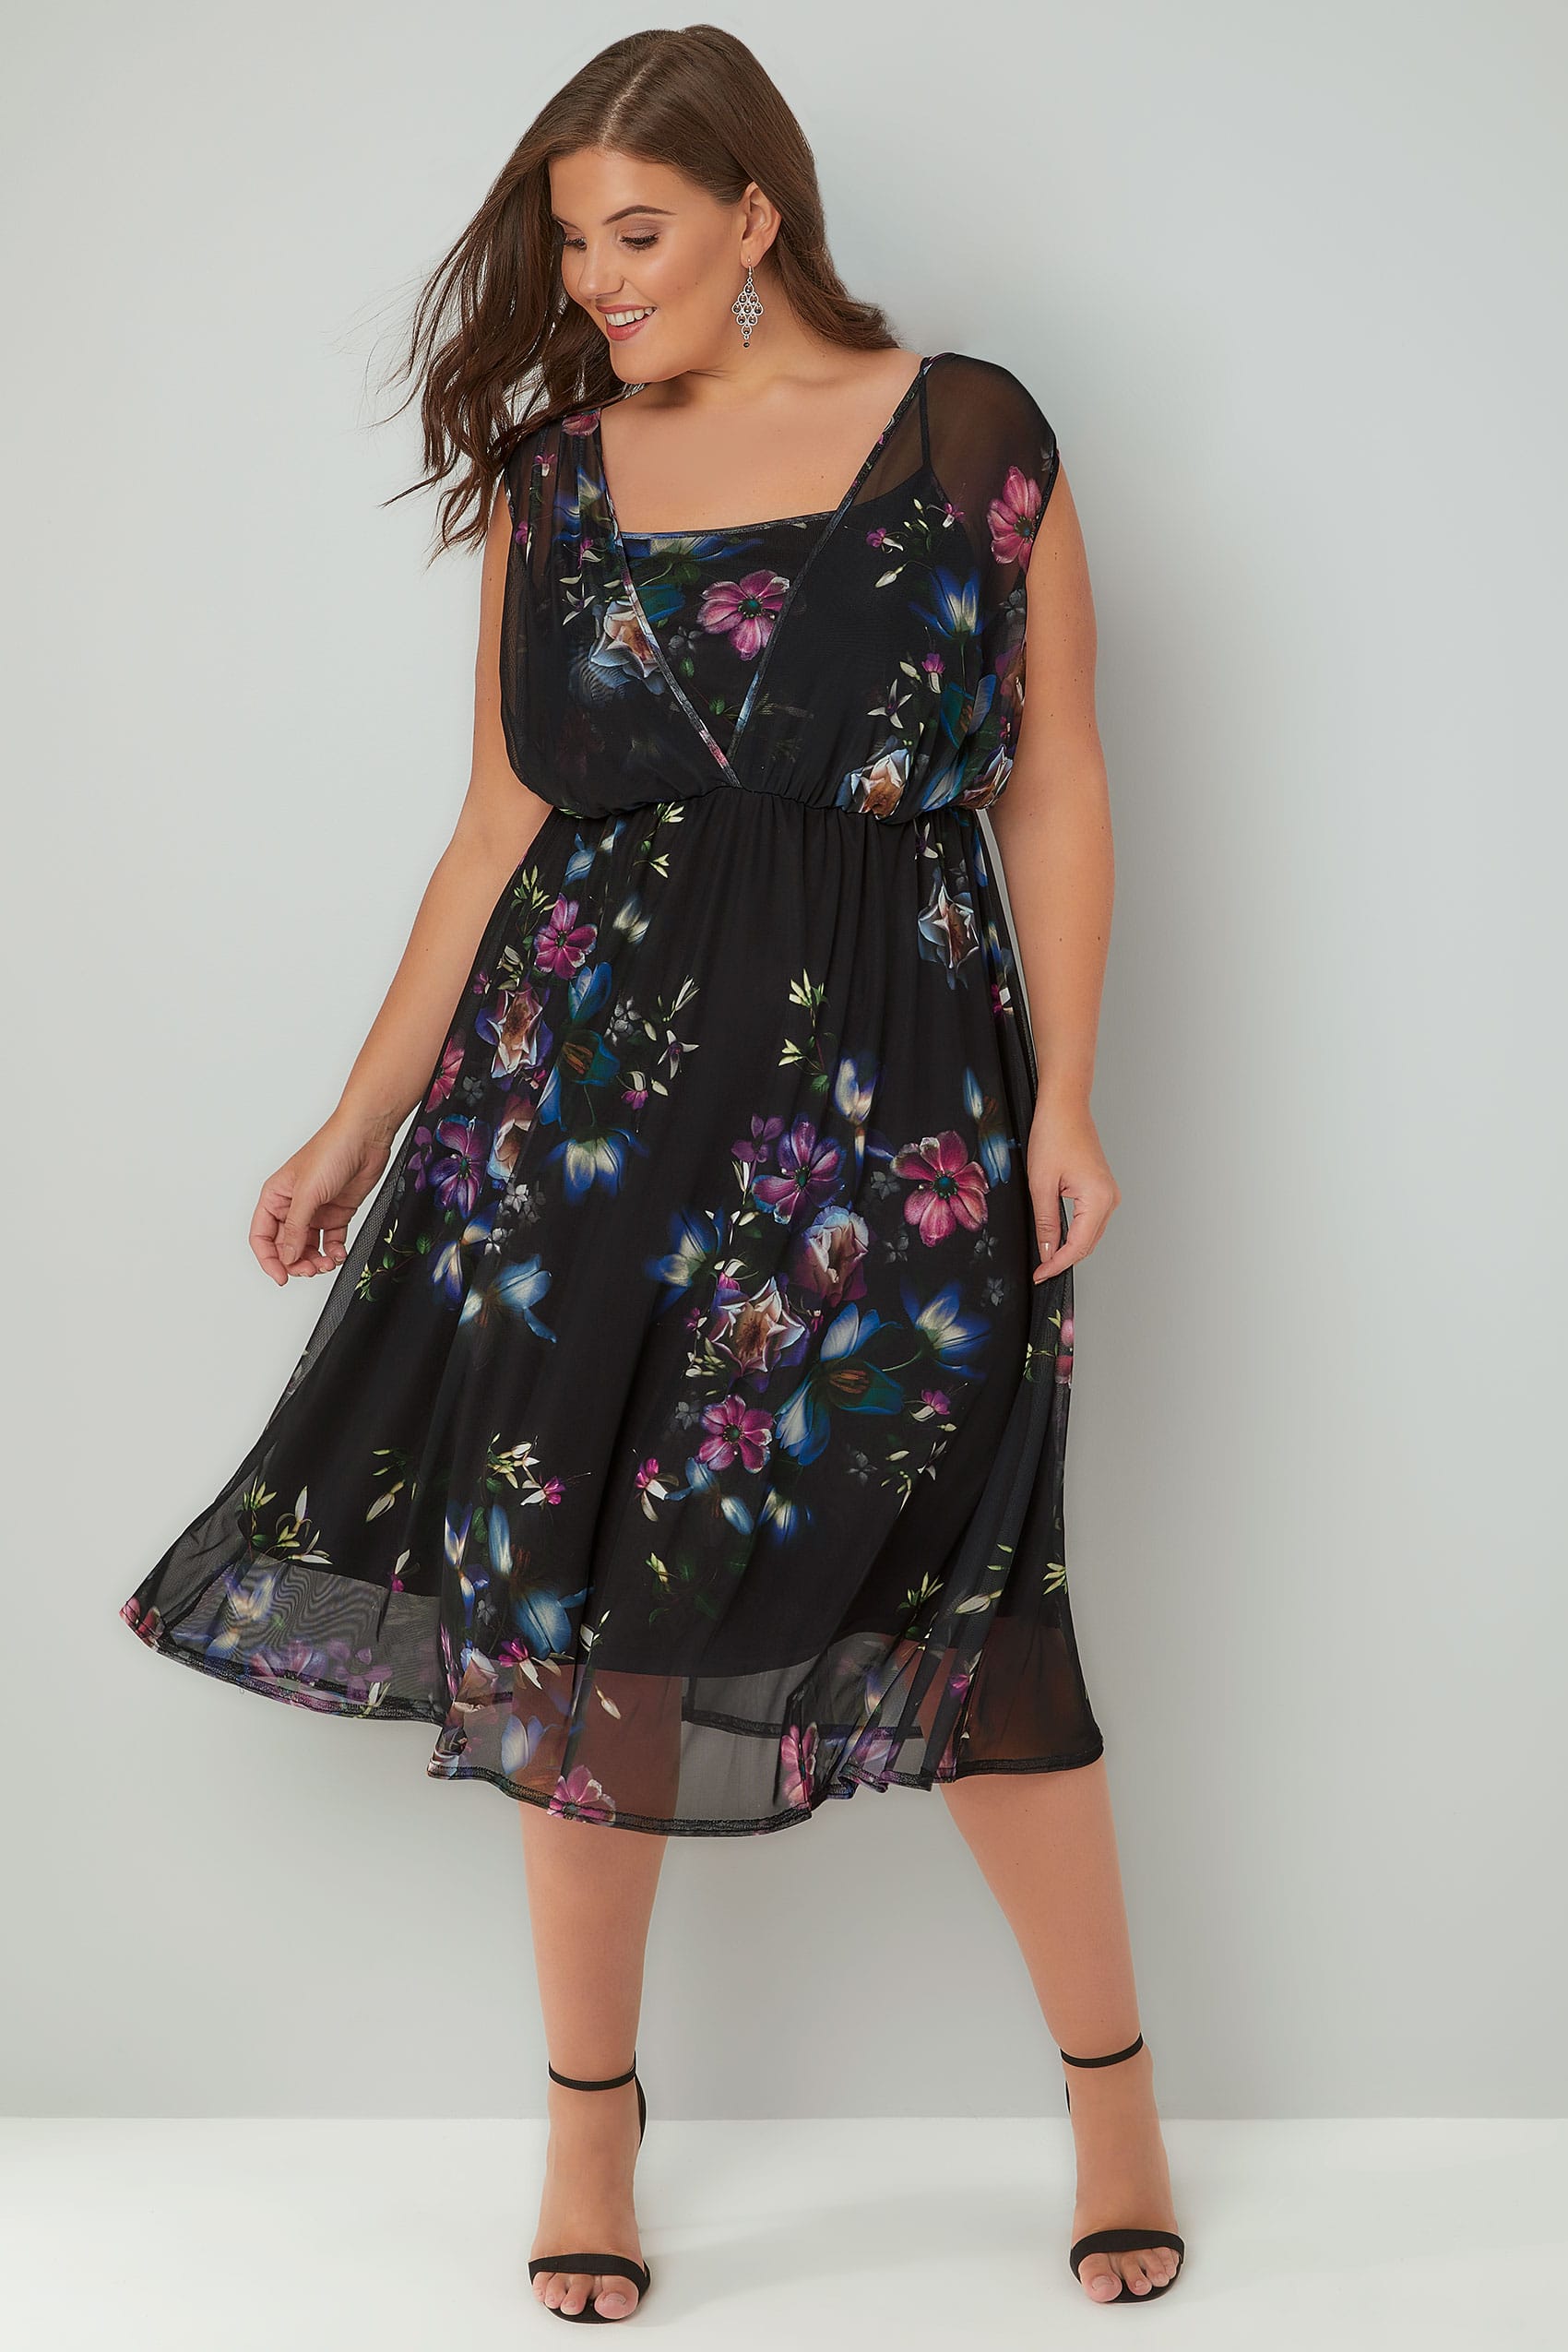 Black Sleeveless Layered Mesh Dress With Floral Print, Plus size 16 to 32